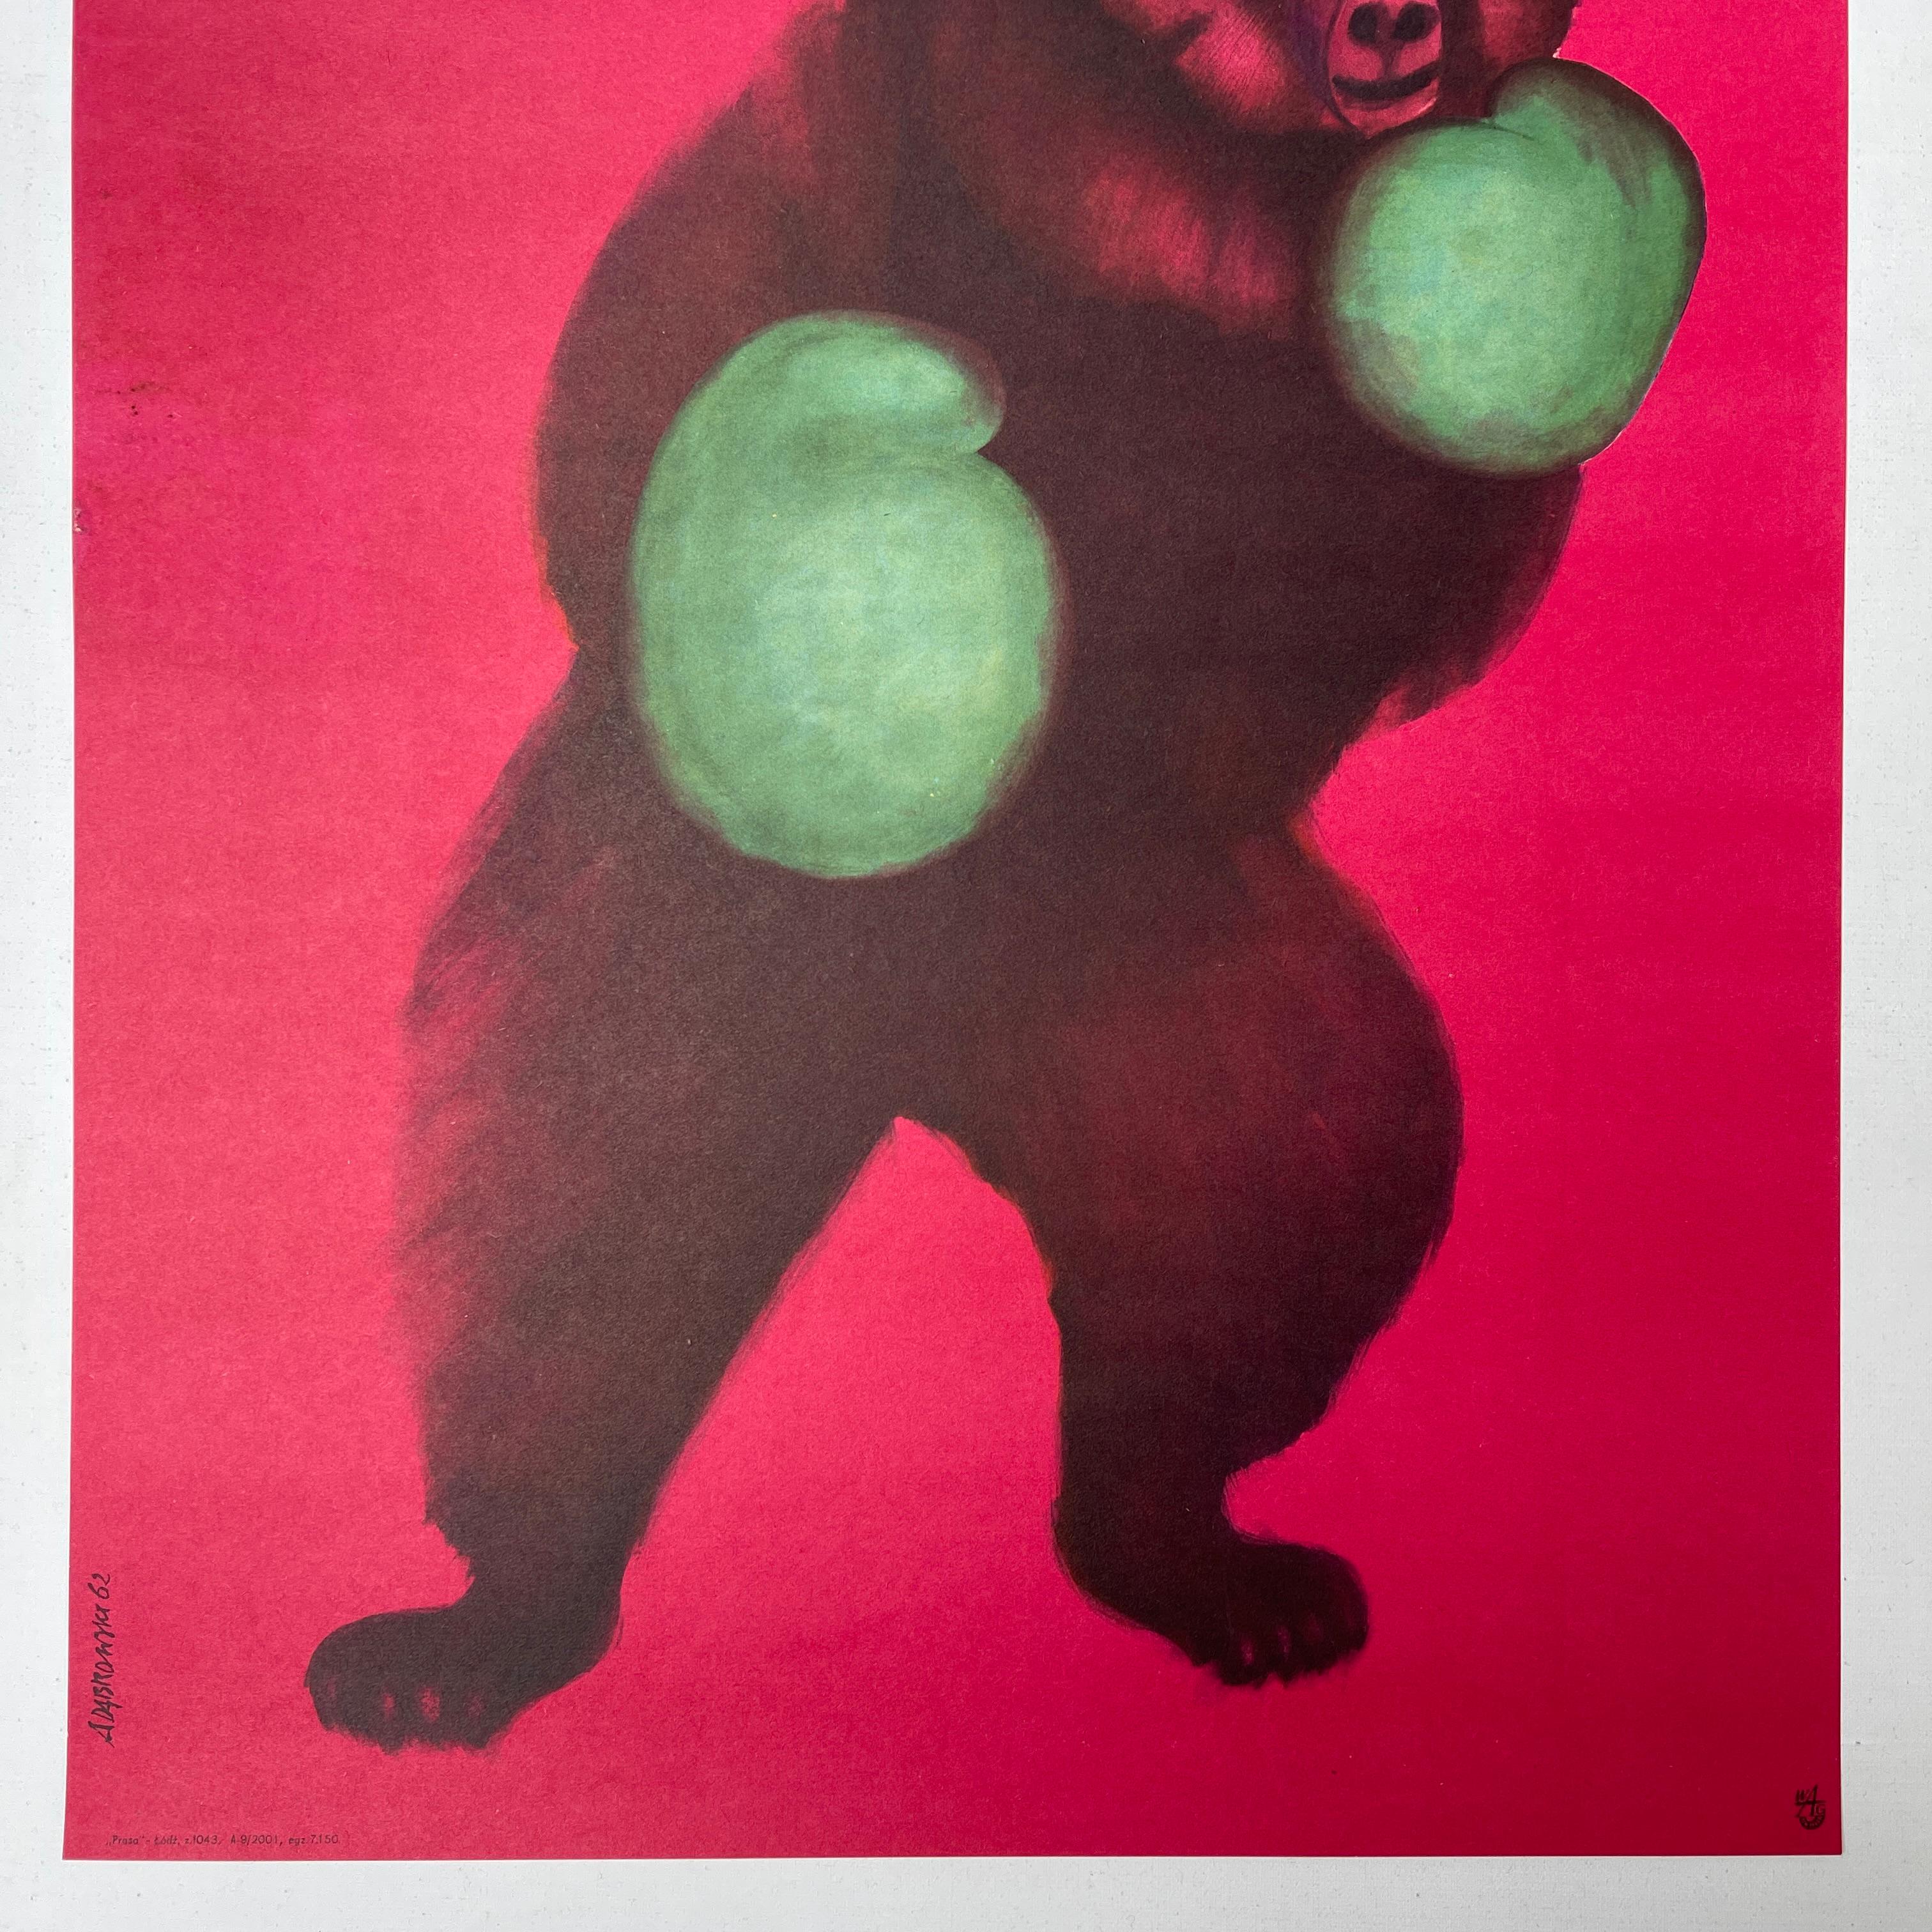 The state commissioned Circus posters first appeared at the beginning of the 1960s so this original vintage Polish Boxing Bear print by Andrzej Onegin-Dabrowski from early 1962 is one of the earliest examples. He might measure in small at 47.5 x